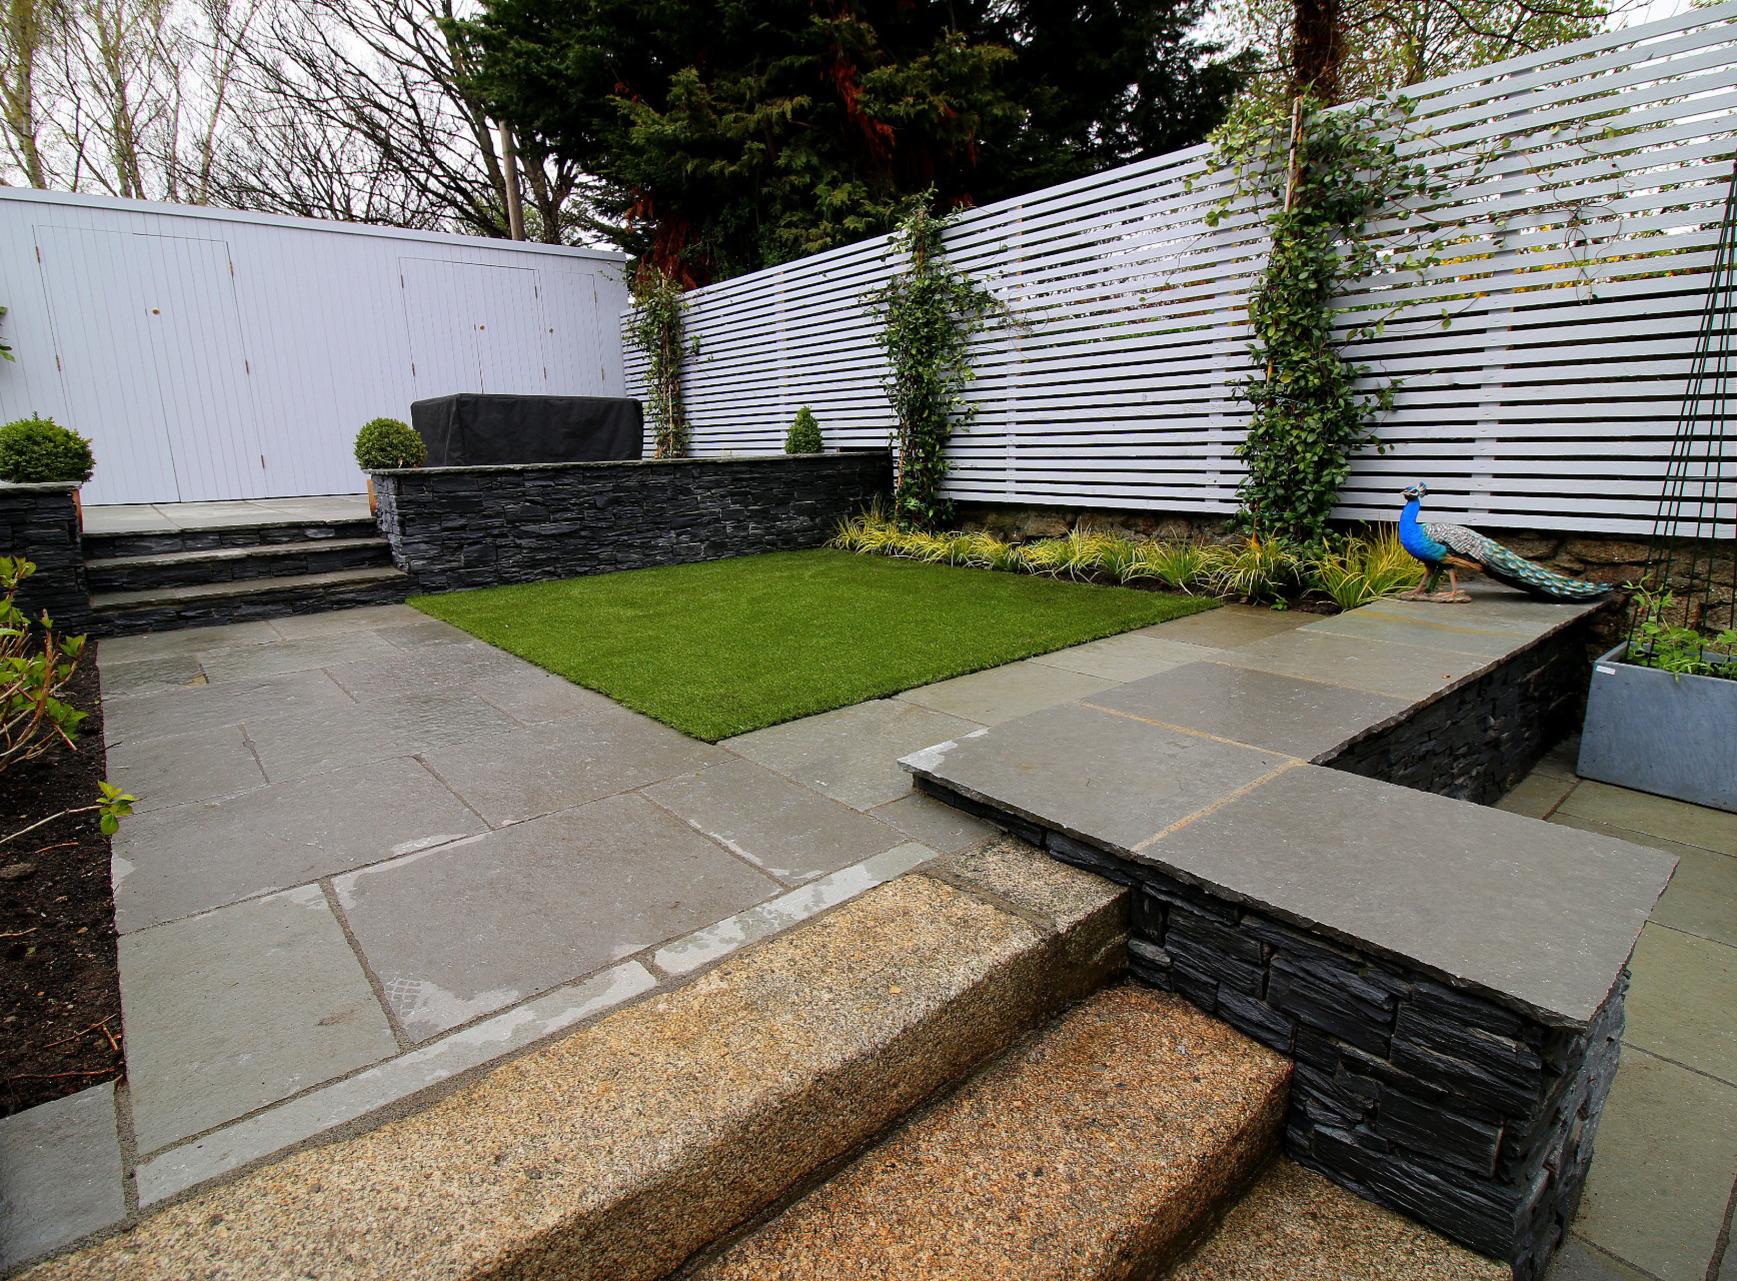 Custom made timber garden fencing | Painetd Timber Slatted Fencing | Rathmines, Dublin 6